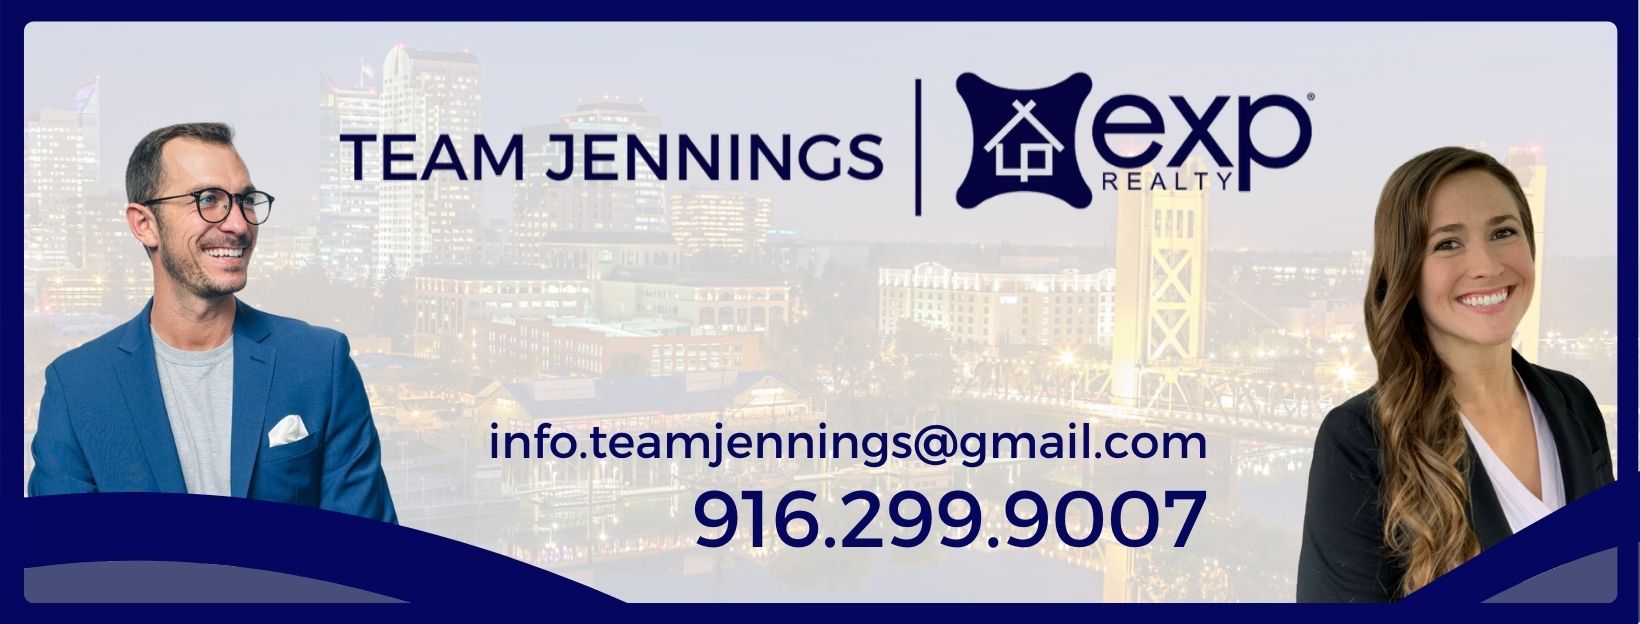 Team Jennings Real Estate - eXp Realty Photo